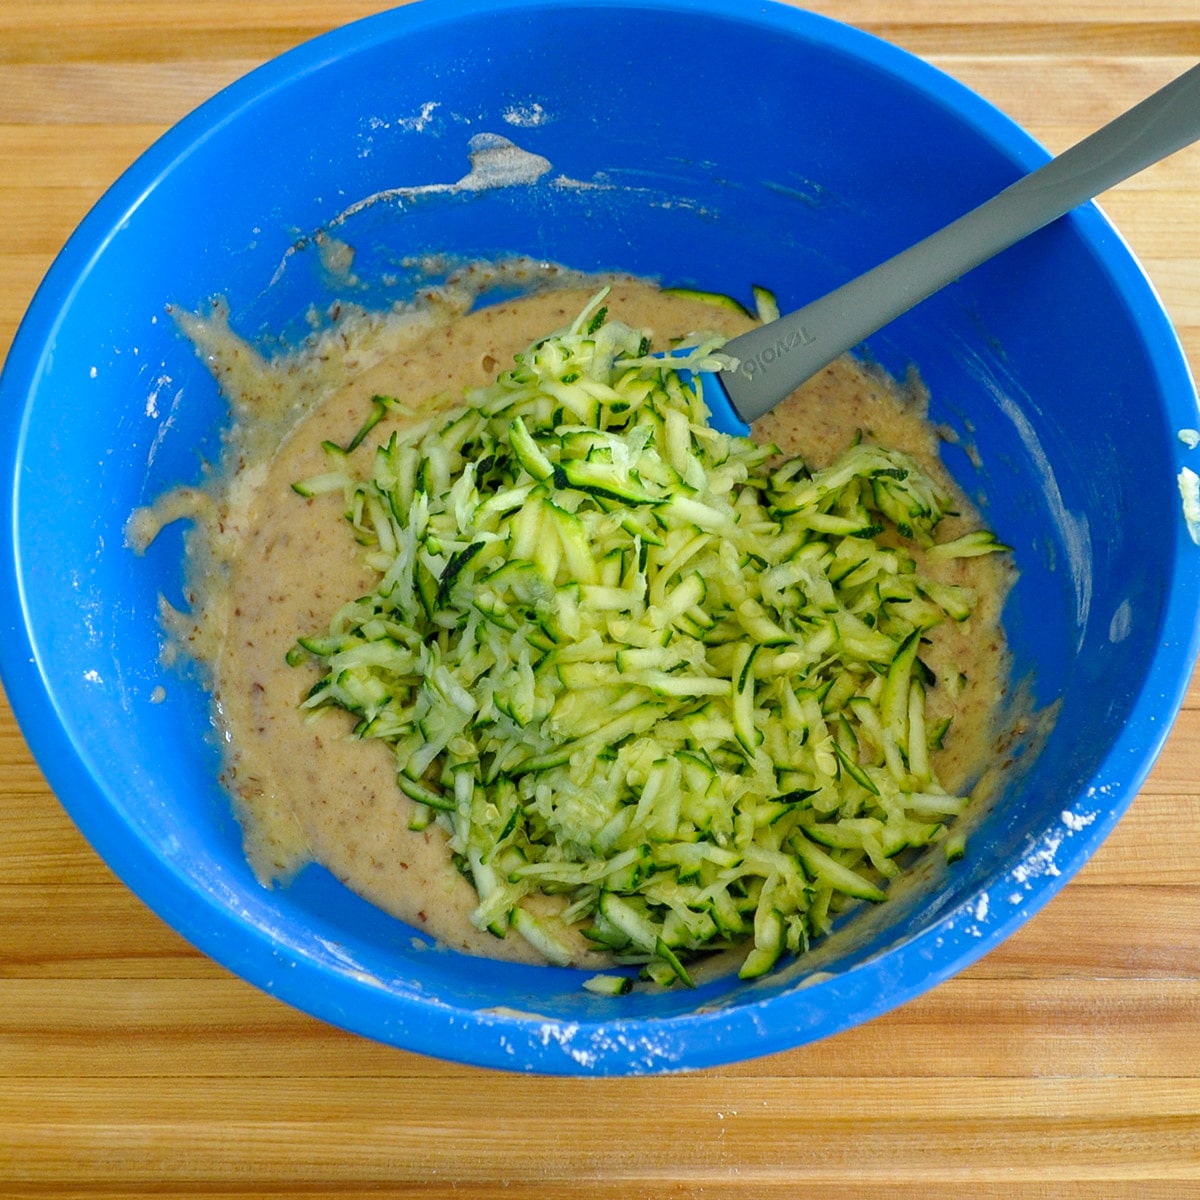 Zucchini ready to mix in to muffin batter in a blue bowl